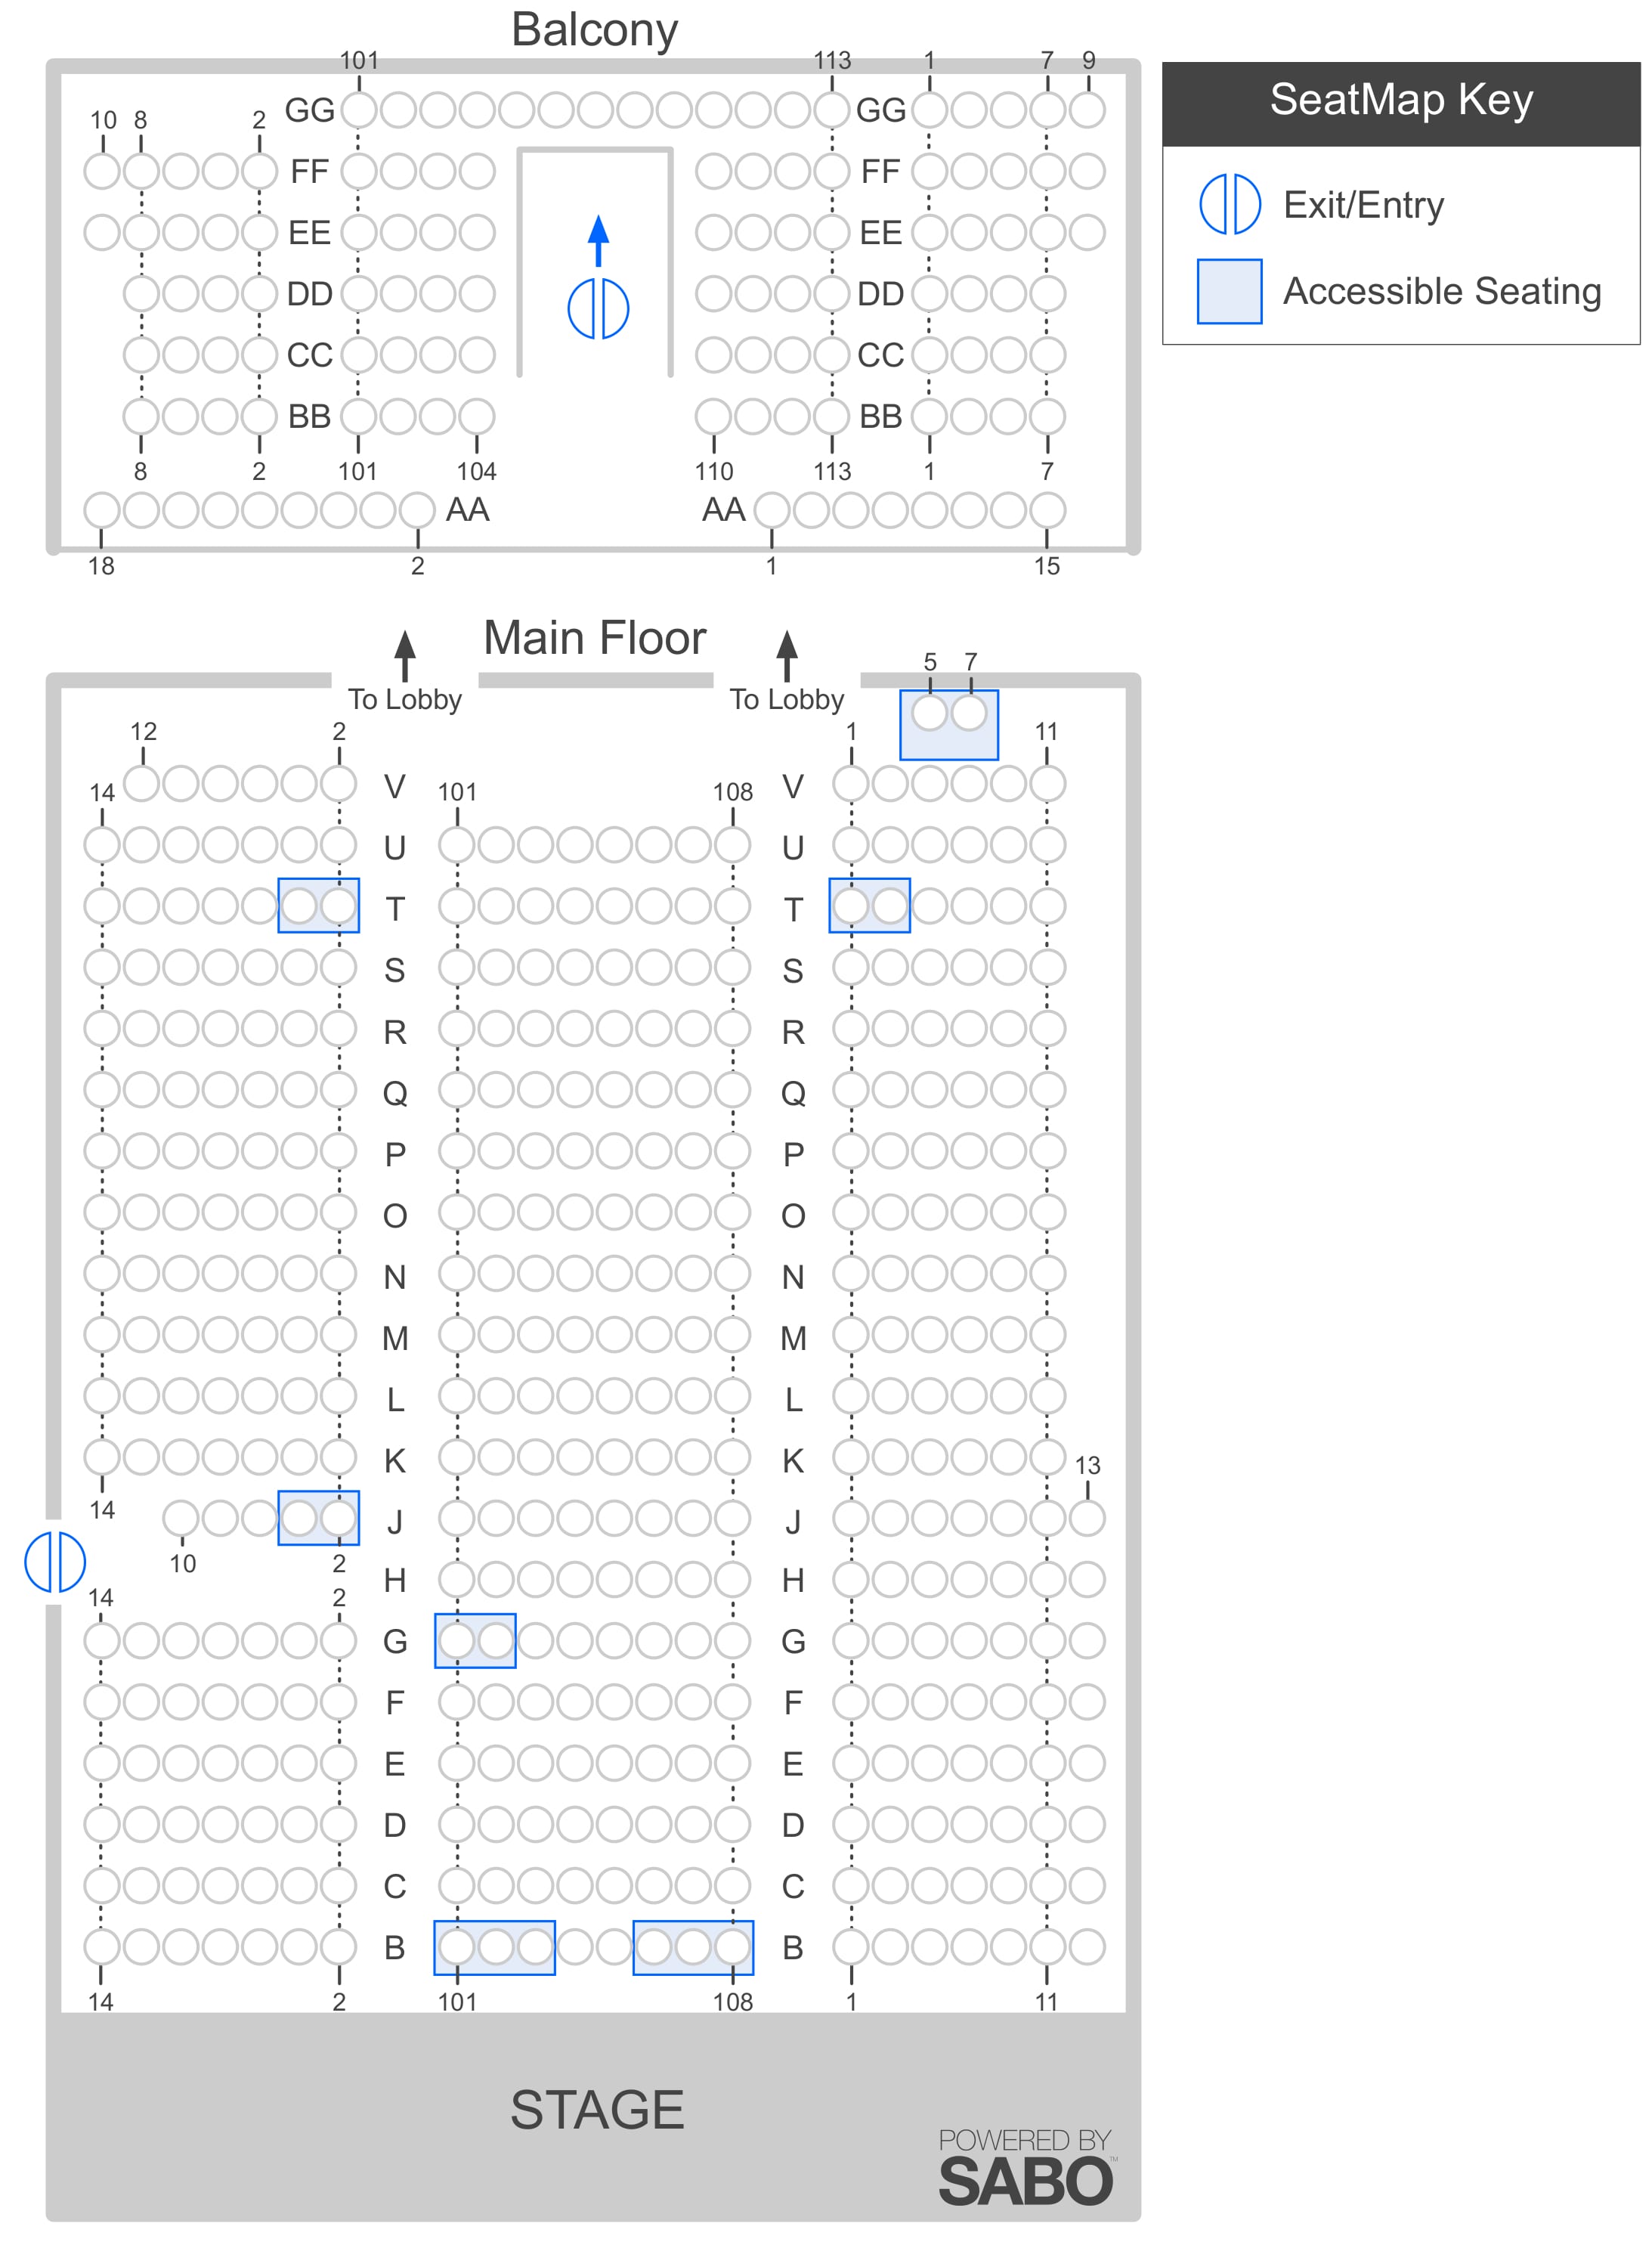 Allen Theater Seating Chart